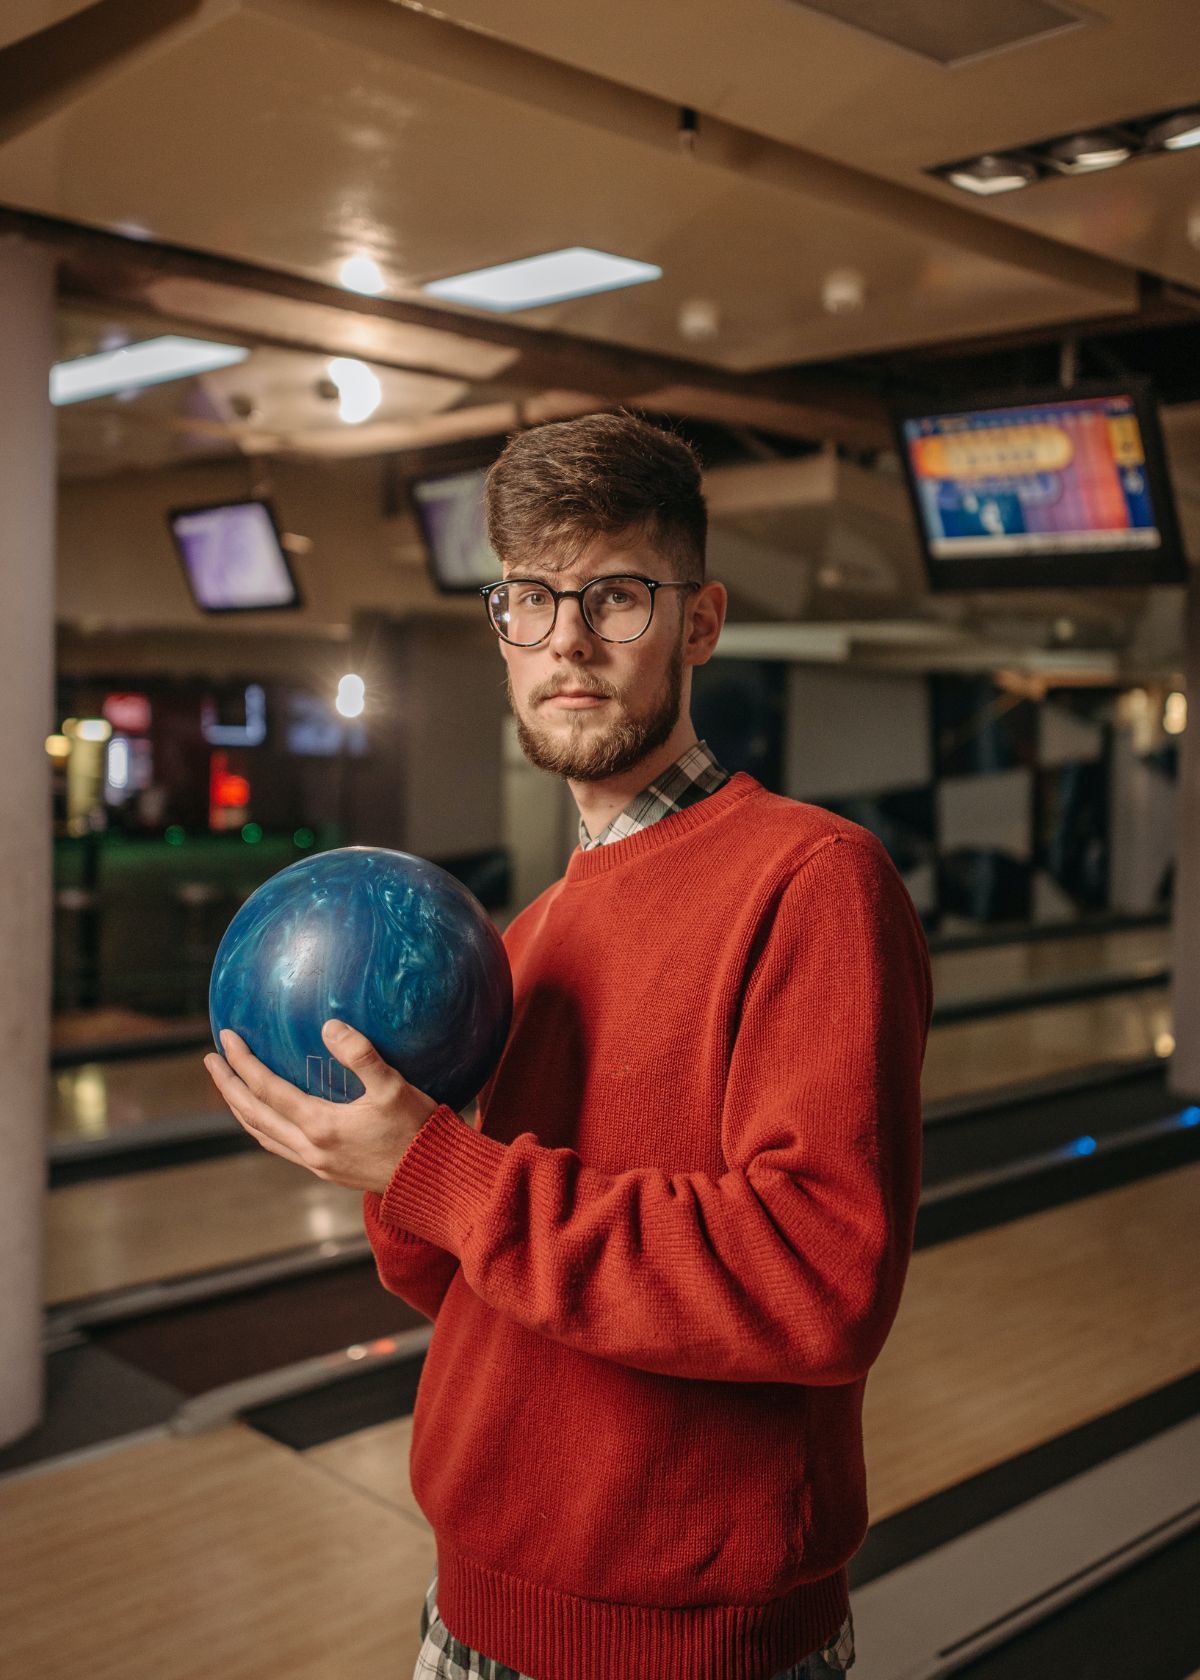 Bowling safety tips